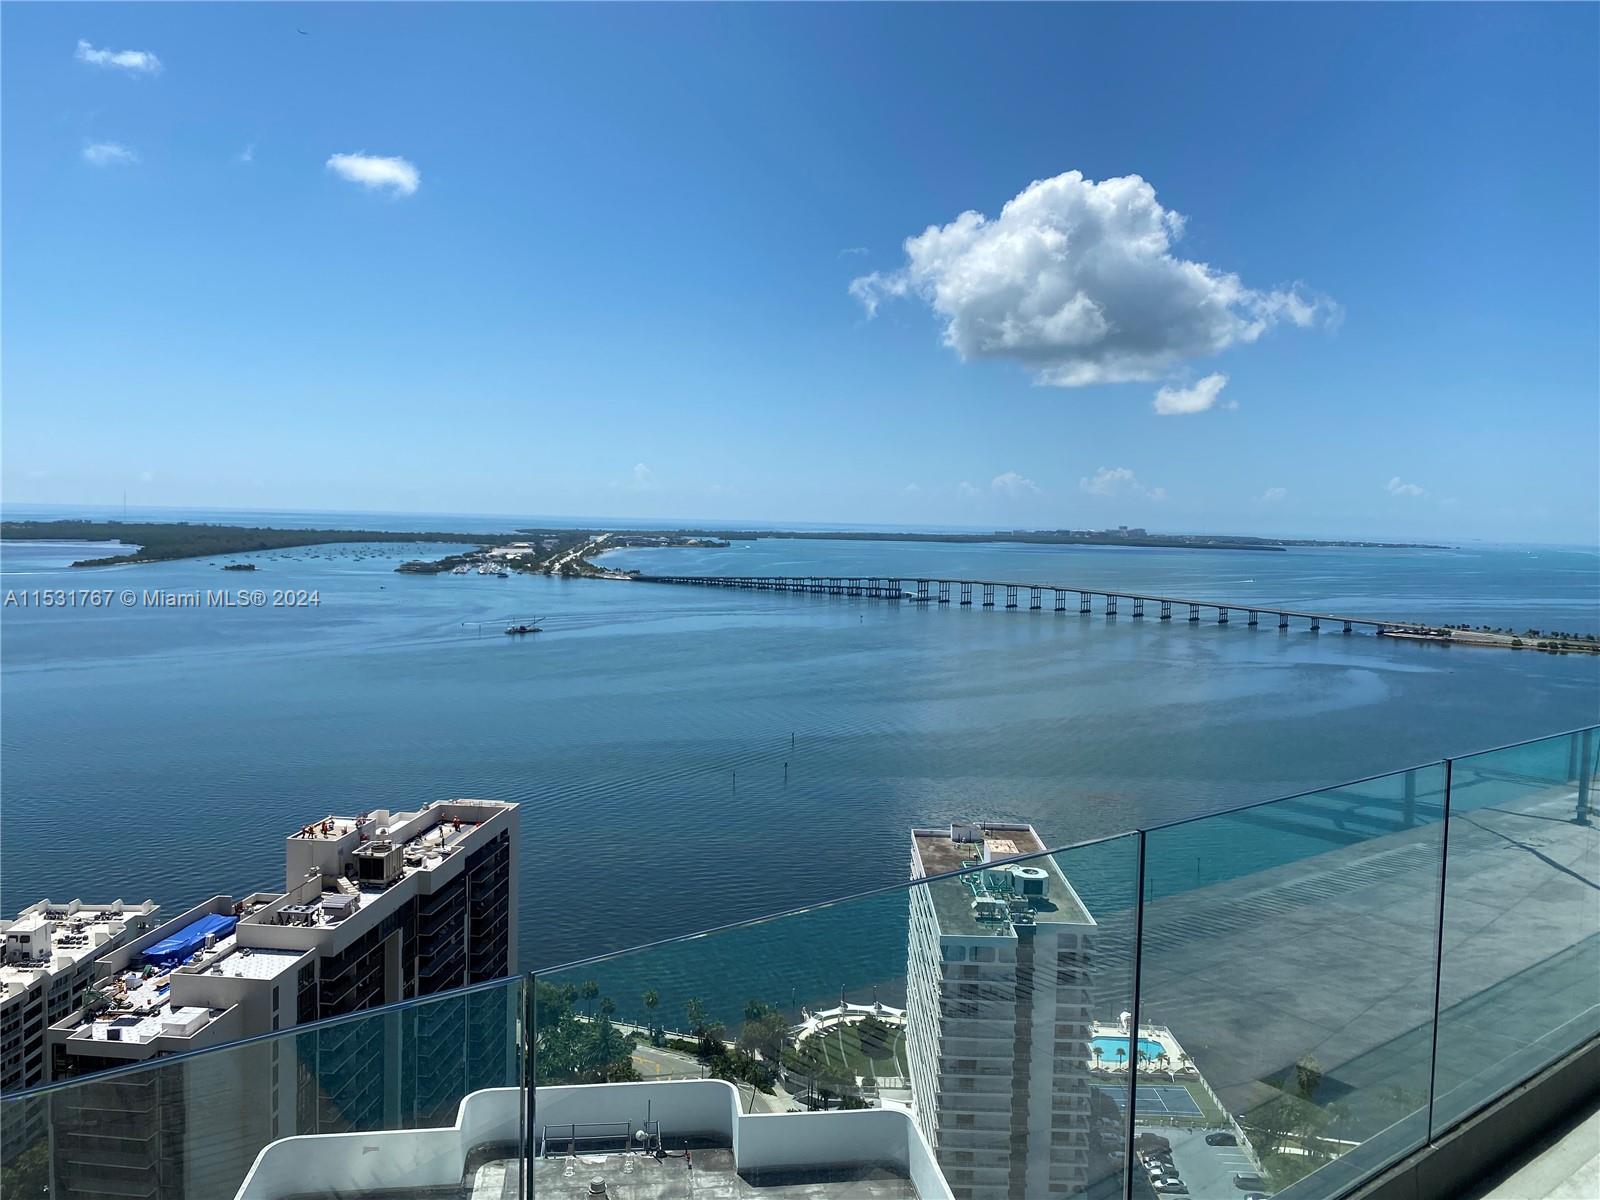 BEAUTIFUL CORNER UNIT AT ECHO BRICKELL WITH SPECTACULAR WATER AND CITY VIEWS FROM EVERY ROOM, 2BD/2.5BA FURNISHED UNIT WITH MARBLE FLOORS, ITALIAN KITCHEN WITH GLASS CABINETRY AND TOP OF THE LINE APPLIANCES SUB-ZERO AND BOSCH, FLOOR TO CEILING WINDOWS,SPACIOUS TERRACE WITH SUMMER KITCHEN,SMART HOME TECHNOLOGY INCLUDED TO CONTROL SURROUND SYSTEM,WINDOWS TREATMENTS, AC AND MORE. 2 PARKING SPACES WITH ROBOTIC PARKING SYSTEM. BOUTIQUE BUILDING WITH ONLY 180 UNITS,STATE OF THE ART AMENITIES,INCLUDING INFINITY EDGE POOL WITH PANORAMIC WATER VIEWS AND DECK WITH FIVE STARS RESORT SERVICE RESTAURANT, BAR, SPA, GYM,PET WALKER, 24/7 CONCIERGE AND VALET PARKING. WALKING DISTANCE FROM SHOPS AND RESTAURANTS. LOCATION, LOCATION!!